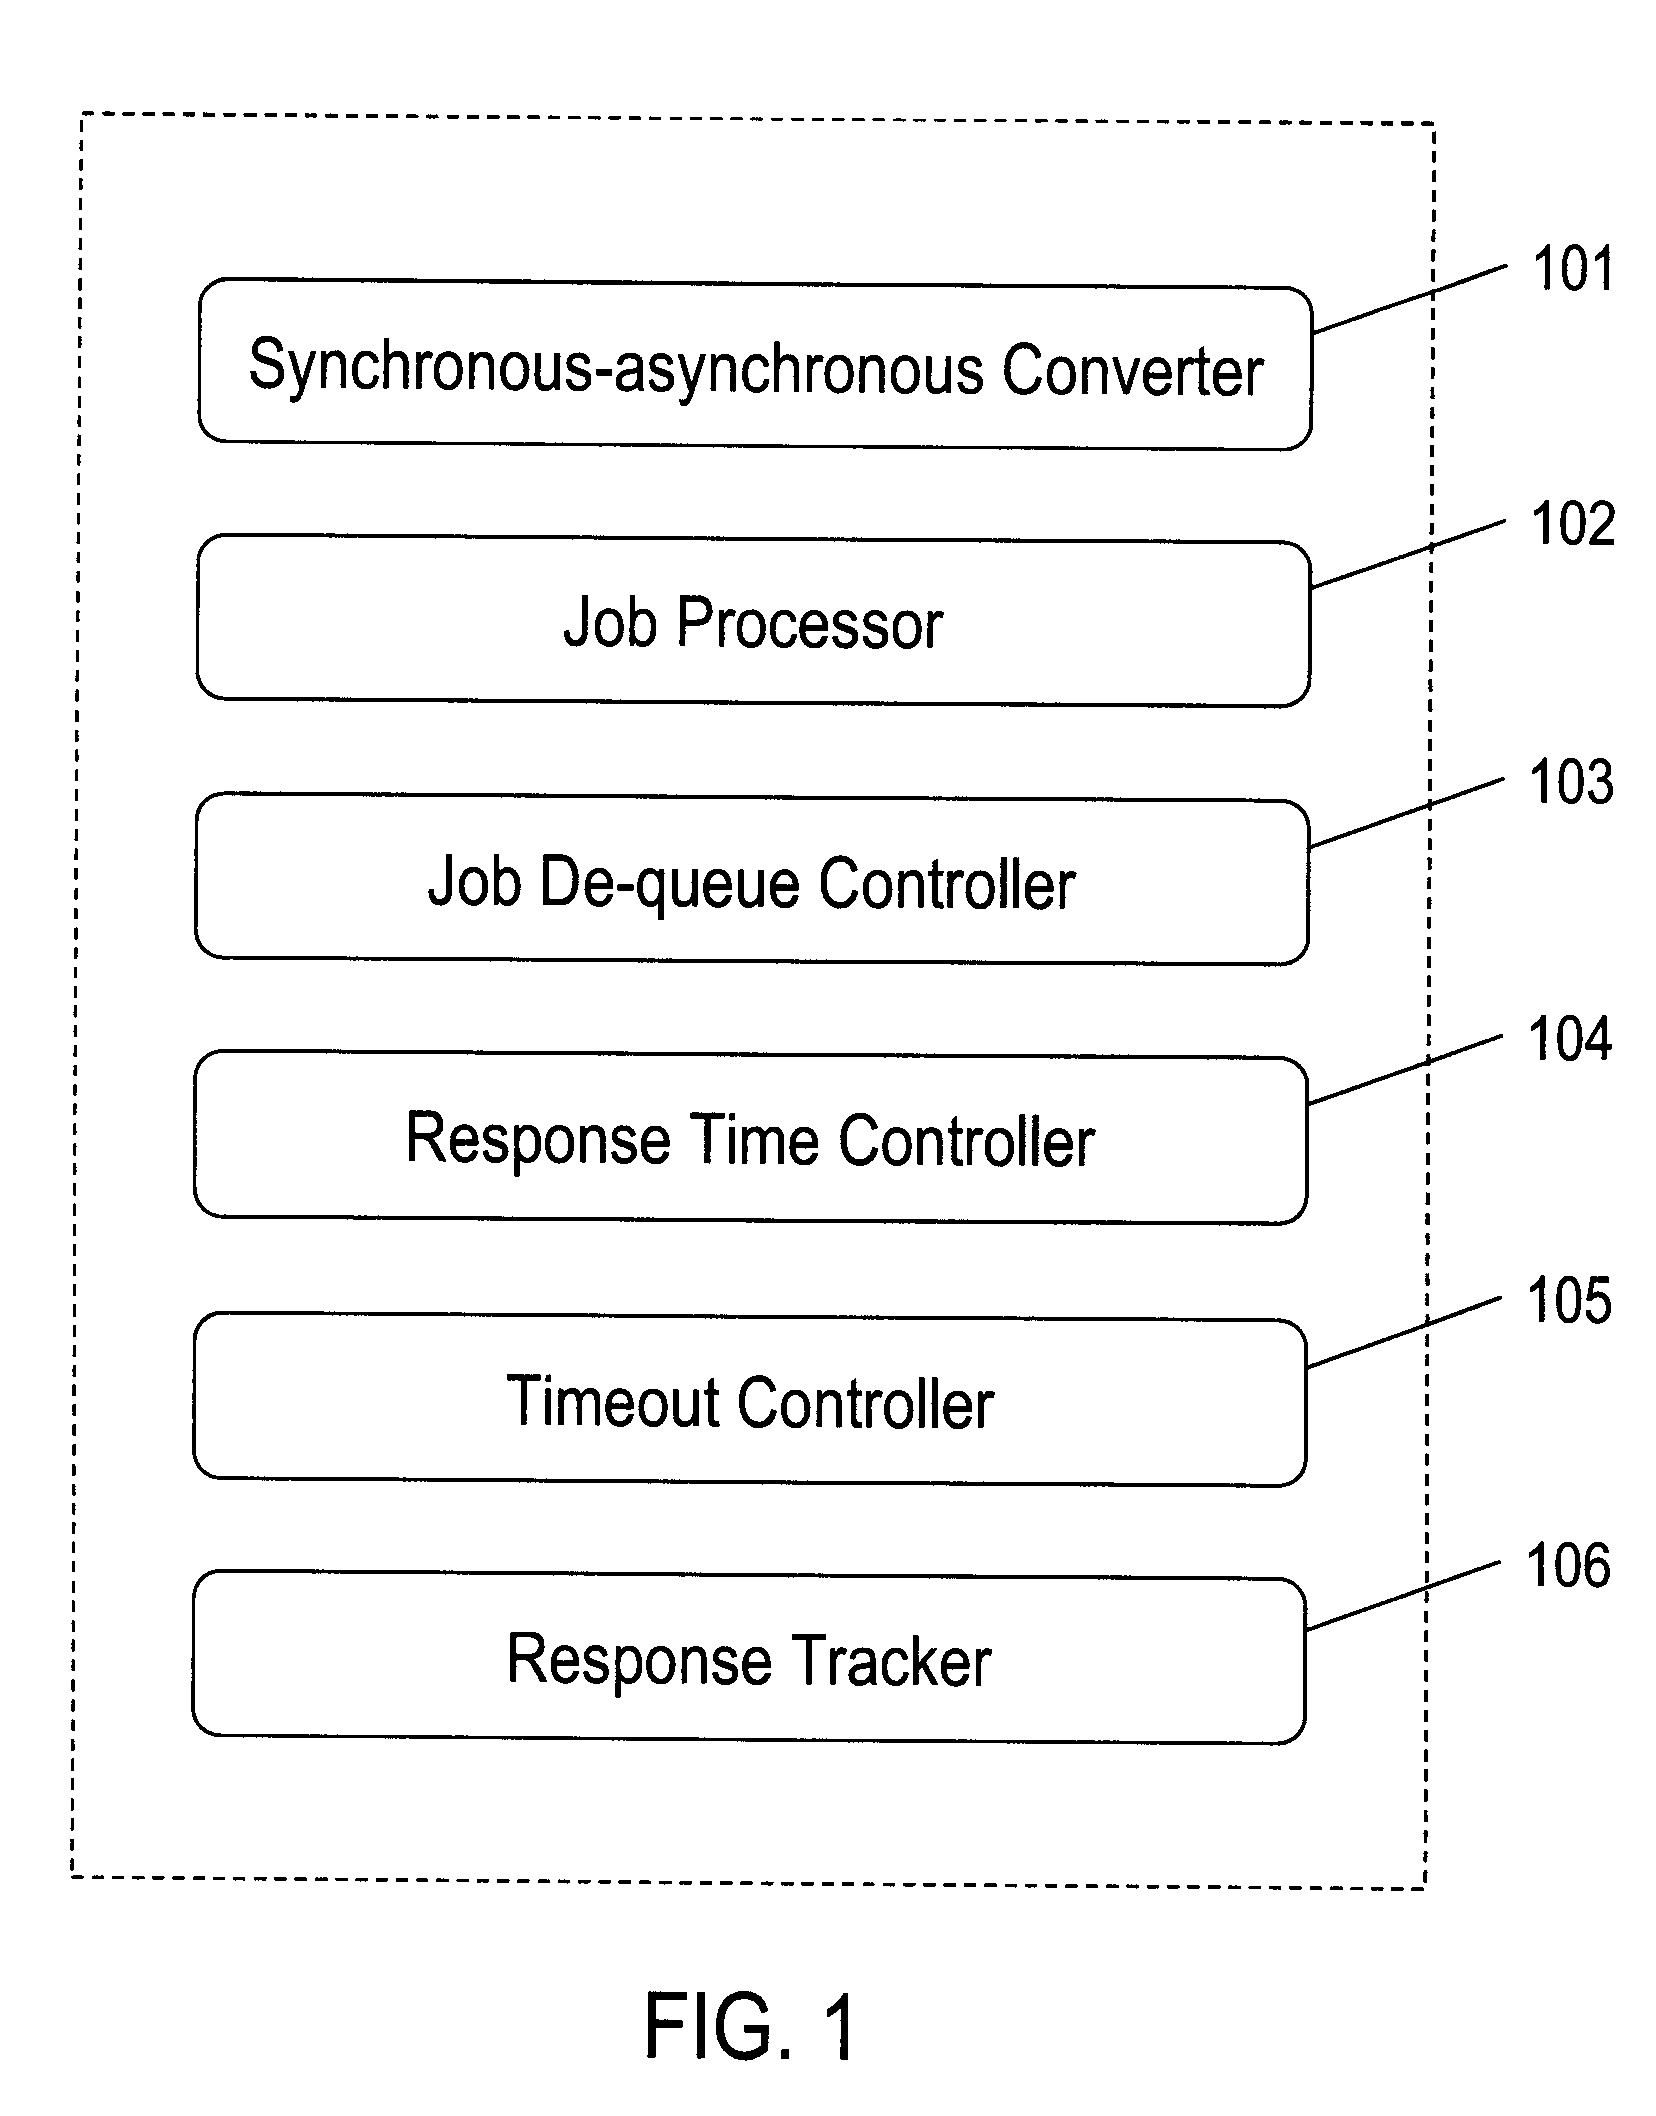 Pull-model Workload Management with Synchronous-Asynchronous-Synchronous Bridge